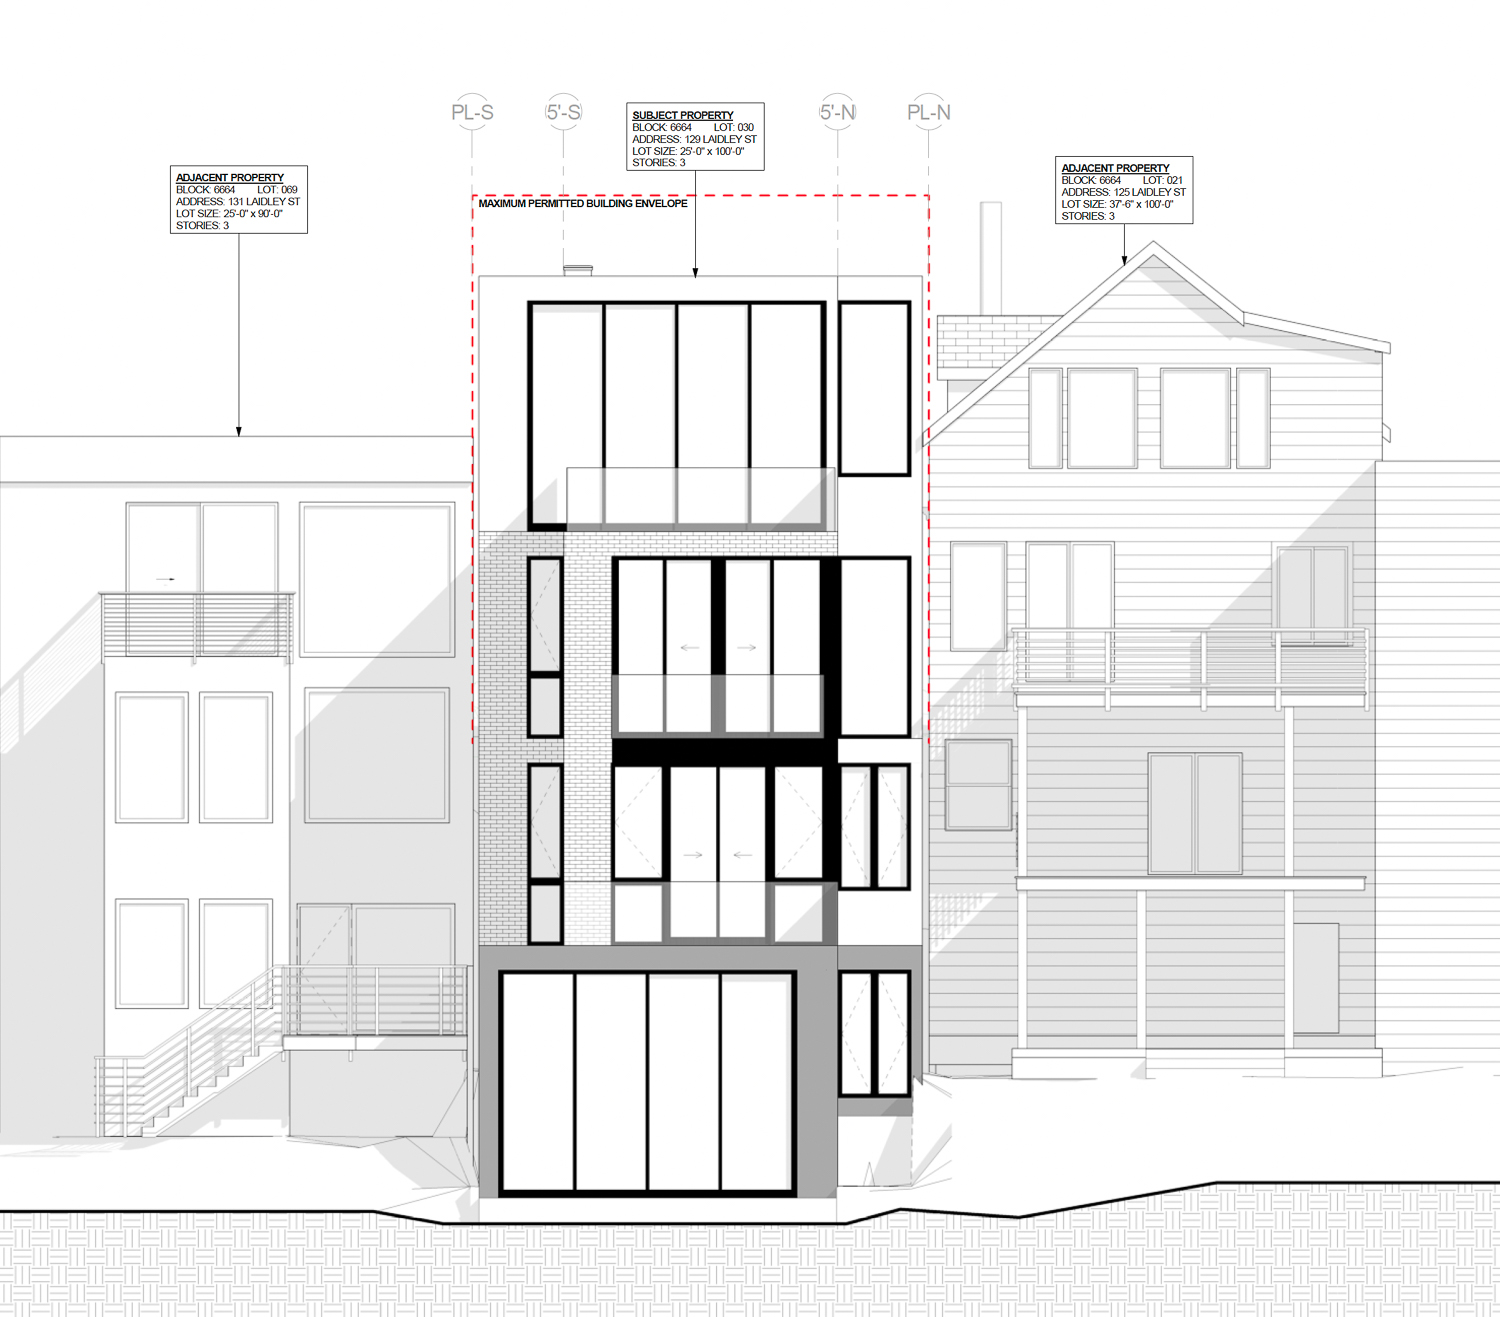 129 Laidley Street rear lot view, illustration by Winder Gibson Architects